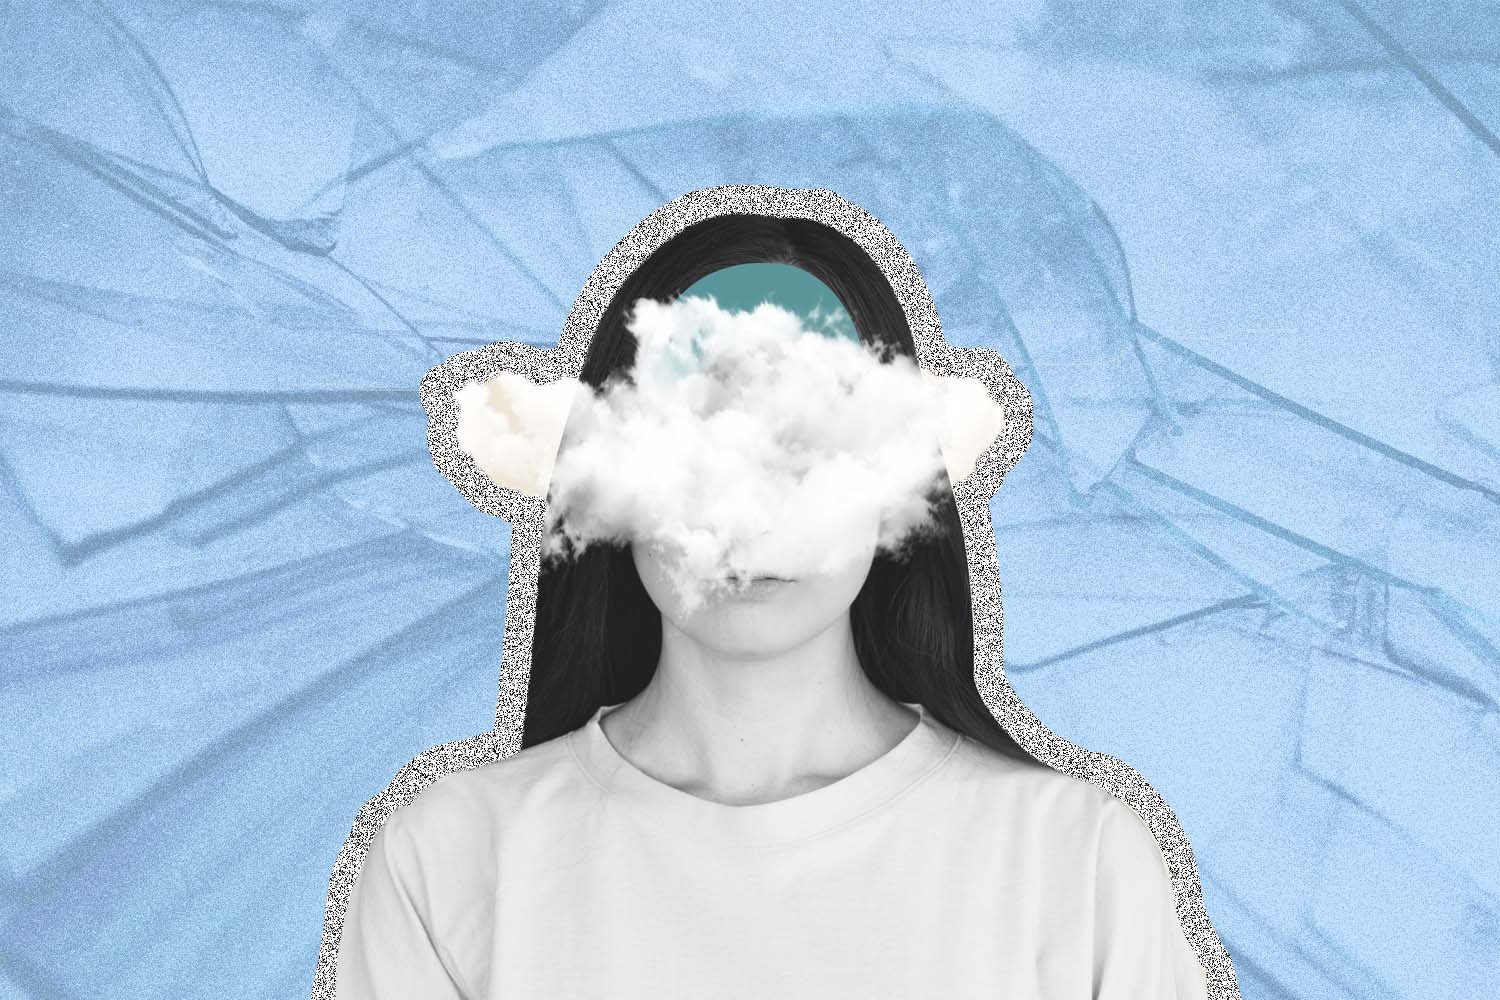 Person with cloud over their head on top of a pile of shattered glass